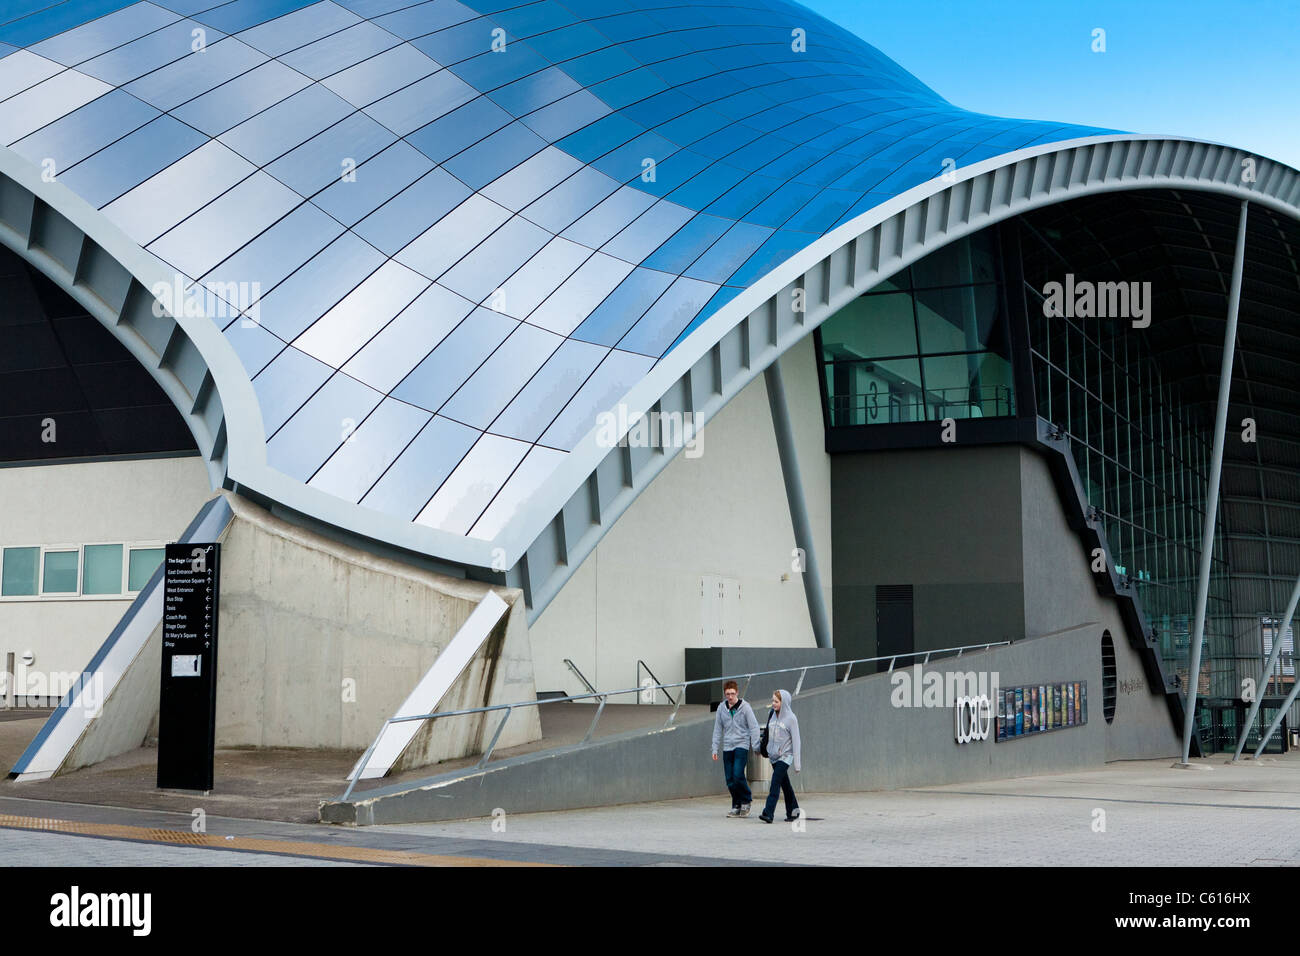 Glass structure of the Sage Building, Gateshead, England Stock Photo